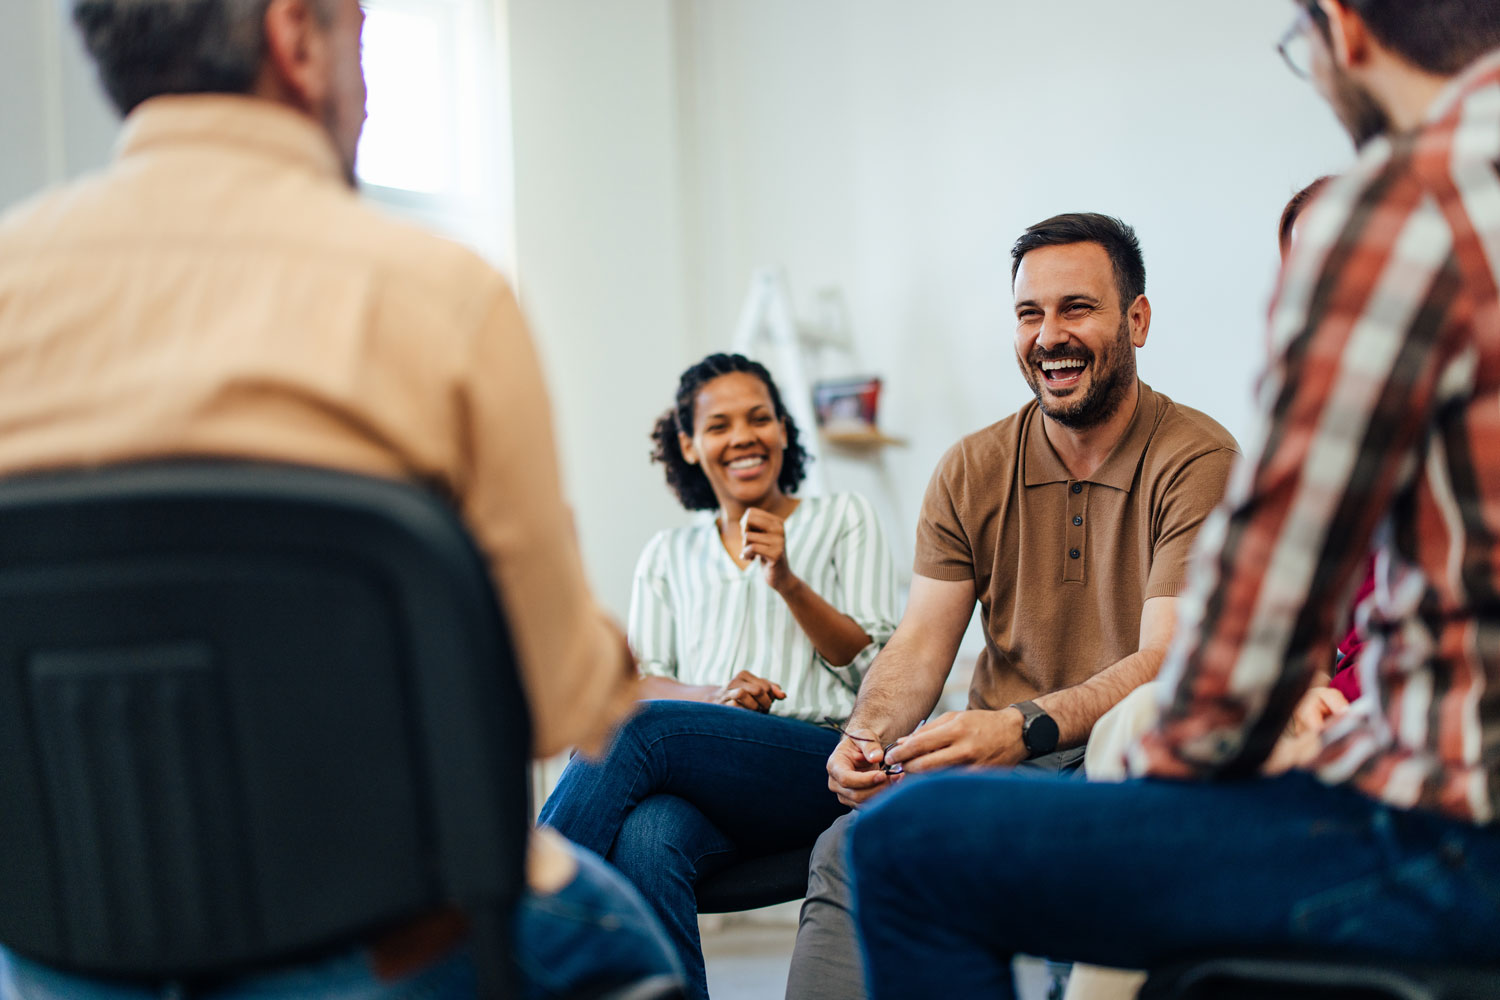 Aftercare provides ongoing support, such as mutual help groups for OCD in Connecticut